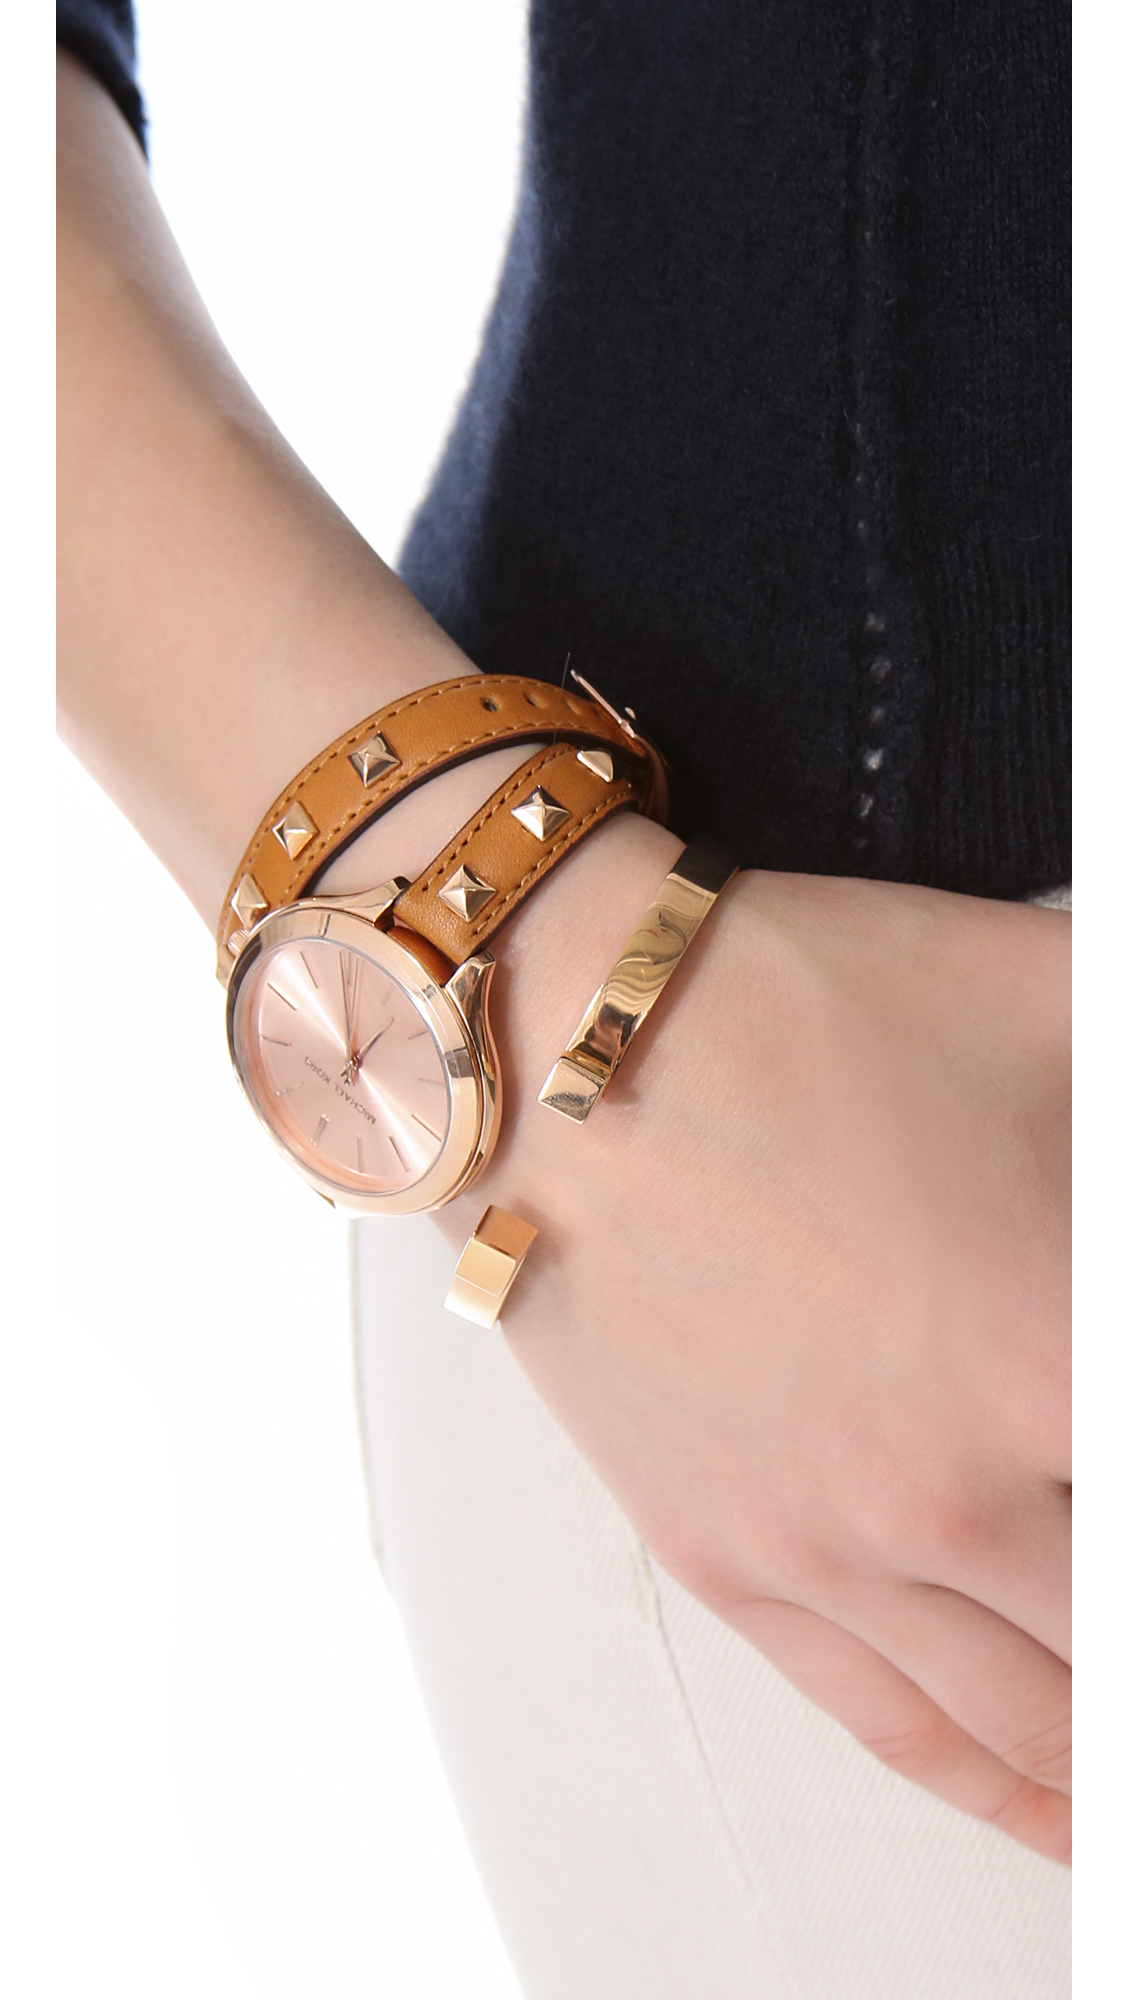 Michael Kors Pyramid Runway Double Wrap Watch in Brown | Lyst